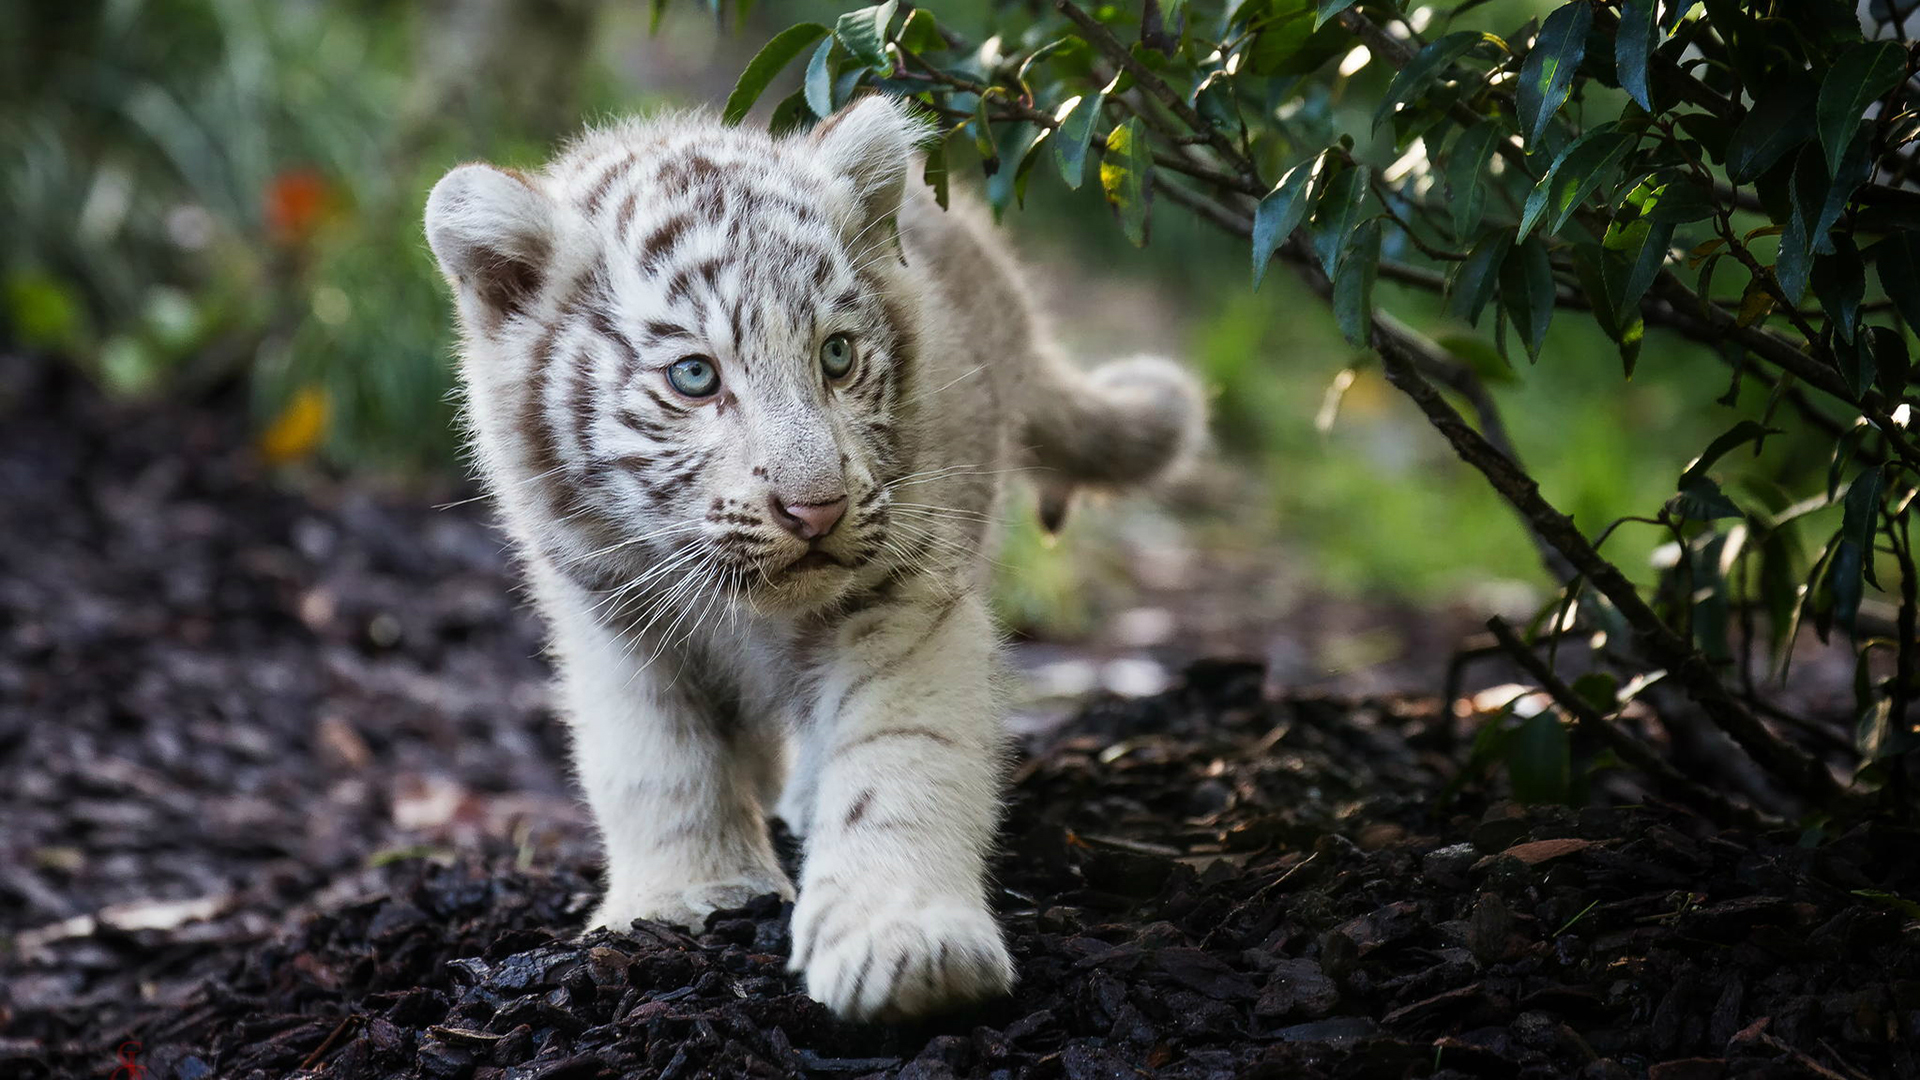 Cute Cub Bengal White Tiger, HD Animals, 4k Wallpapers, Images